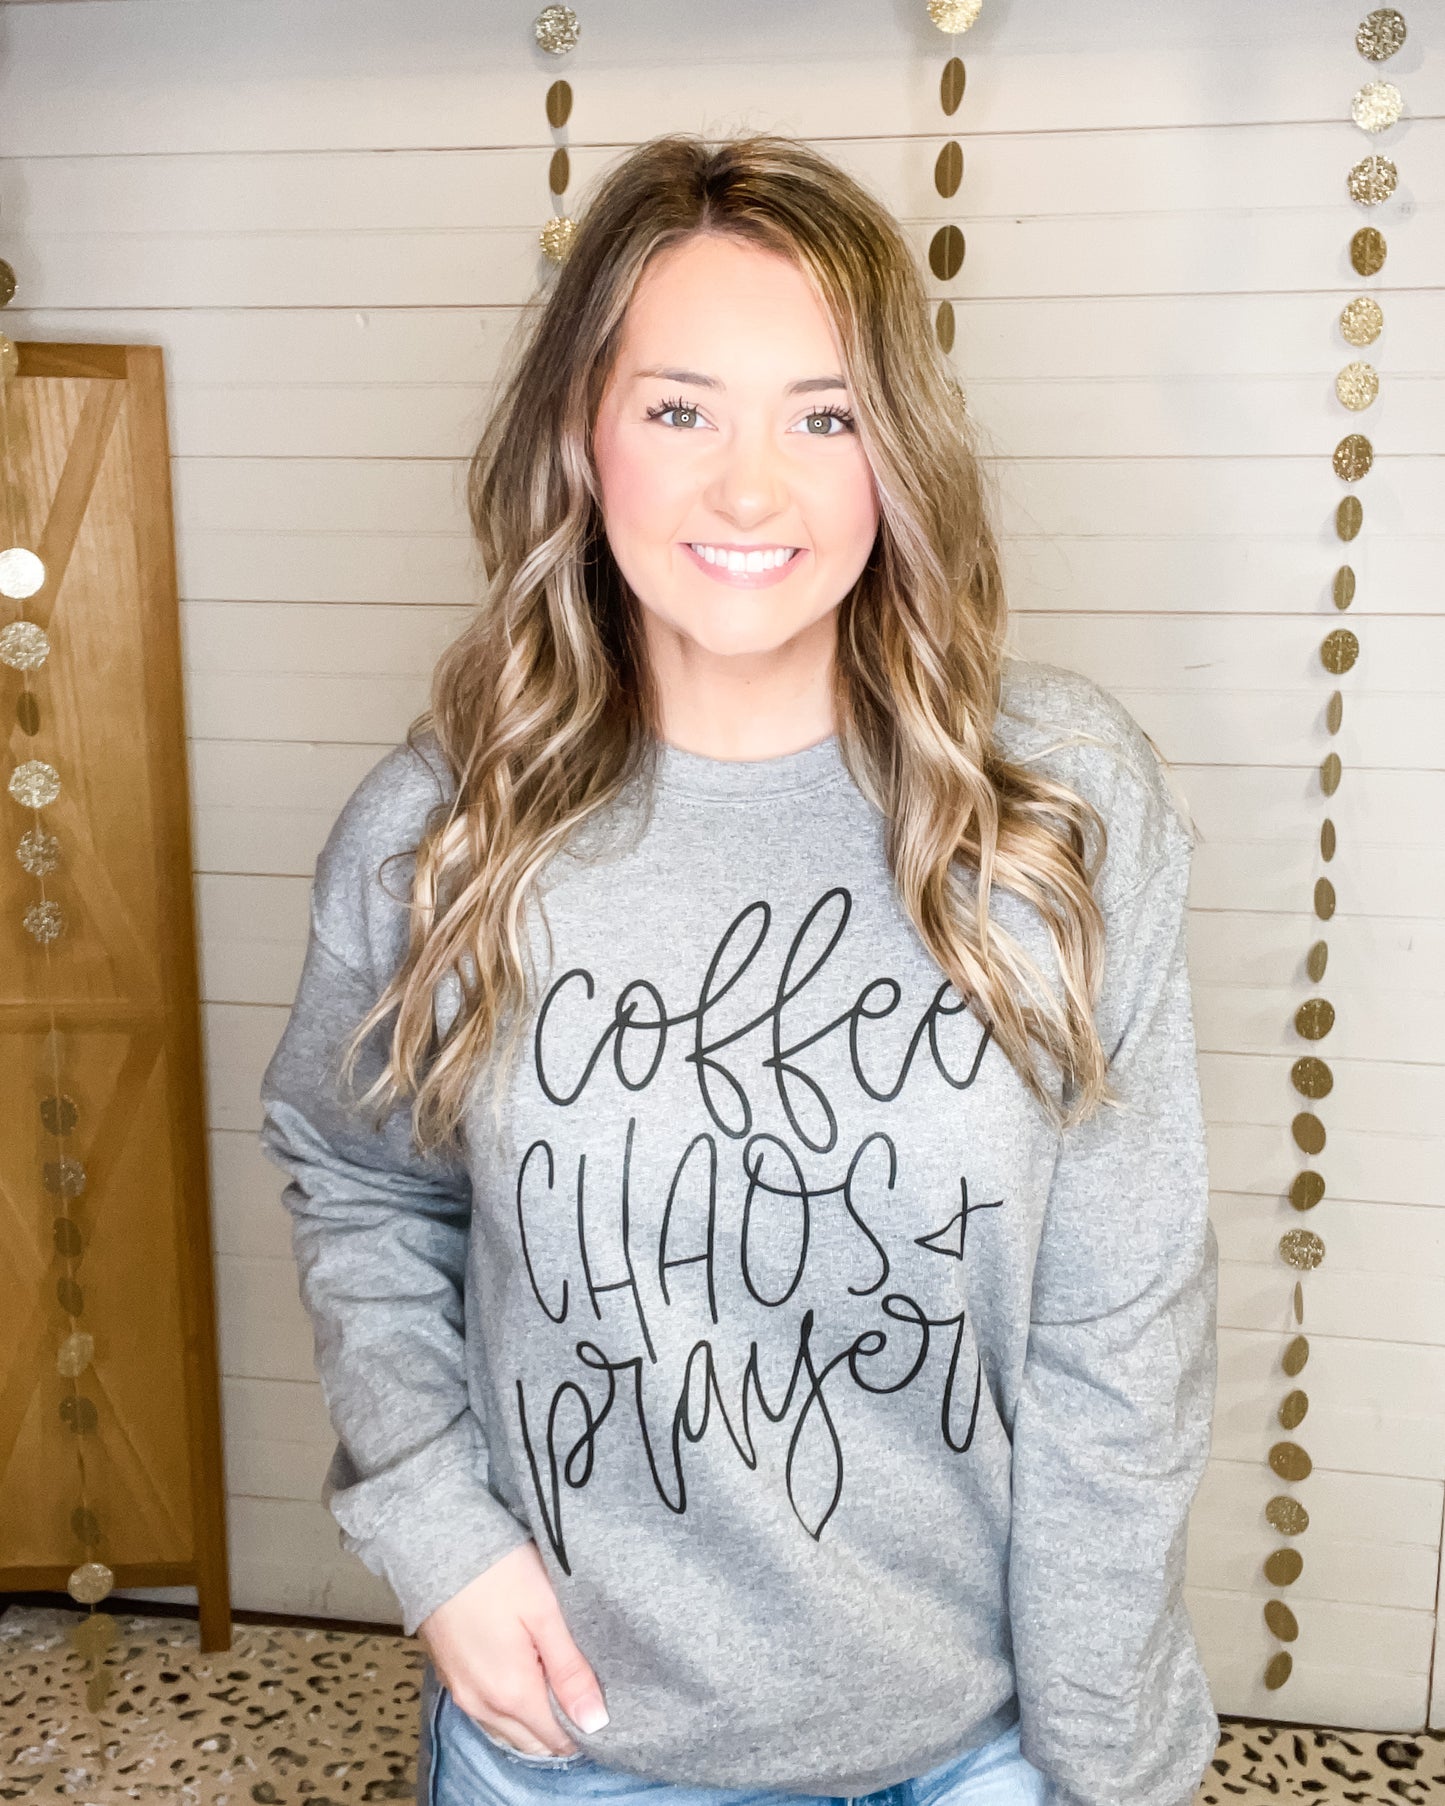 Coffee Chaos And Prayer Pullover